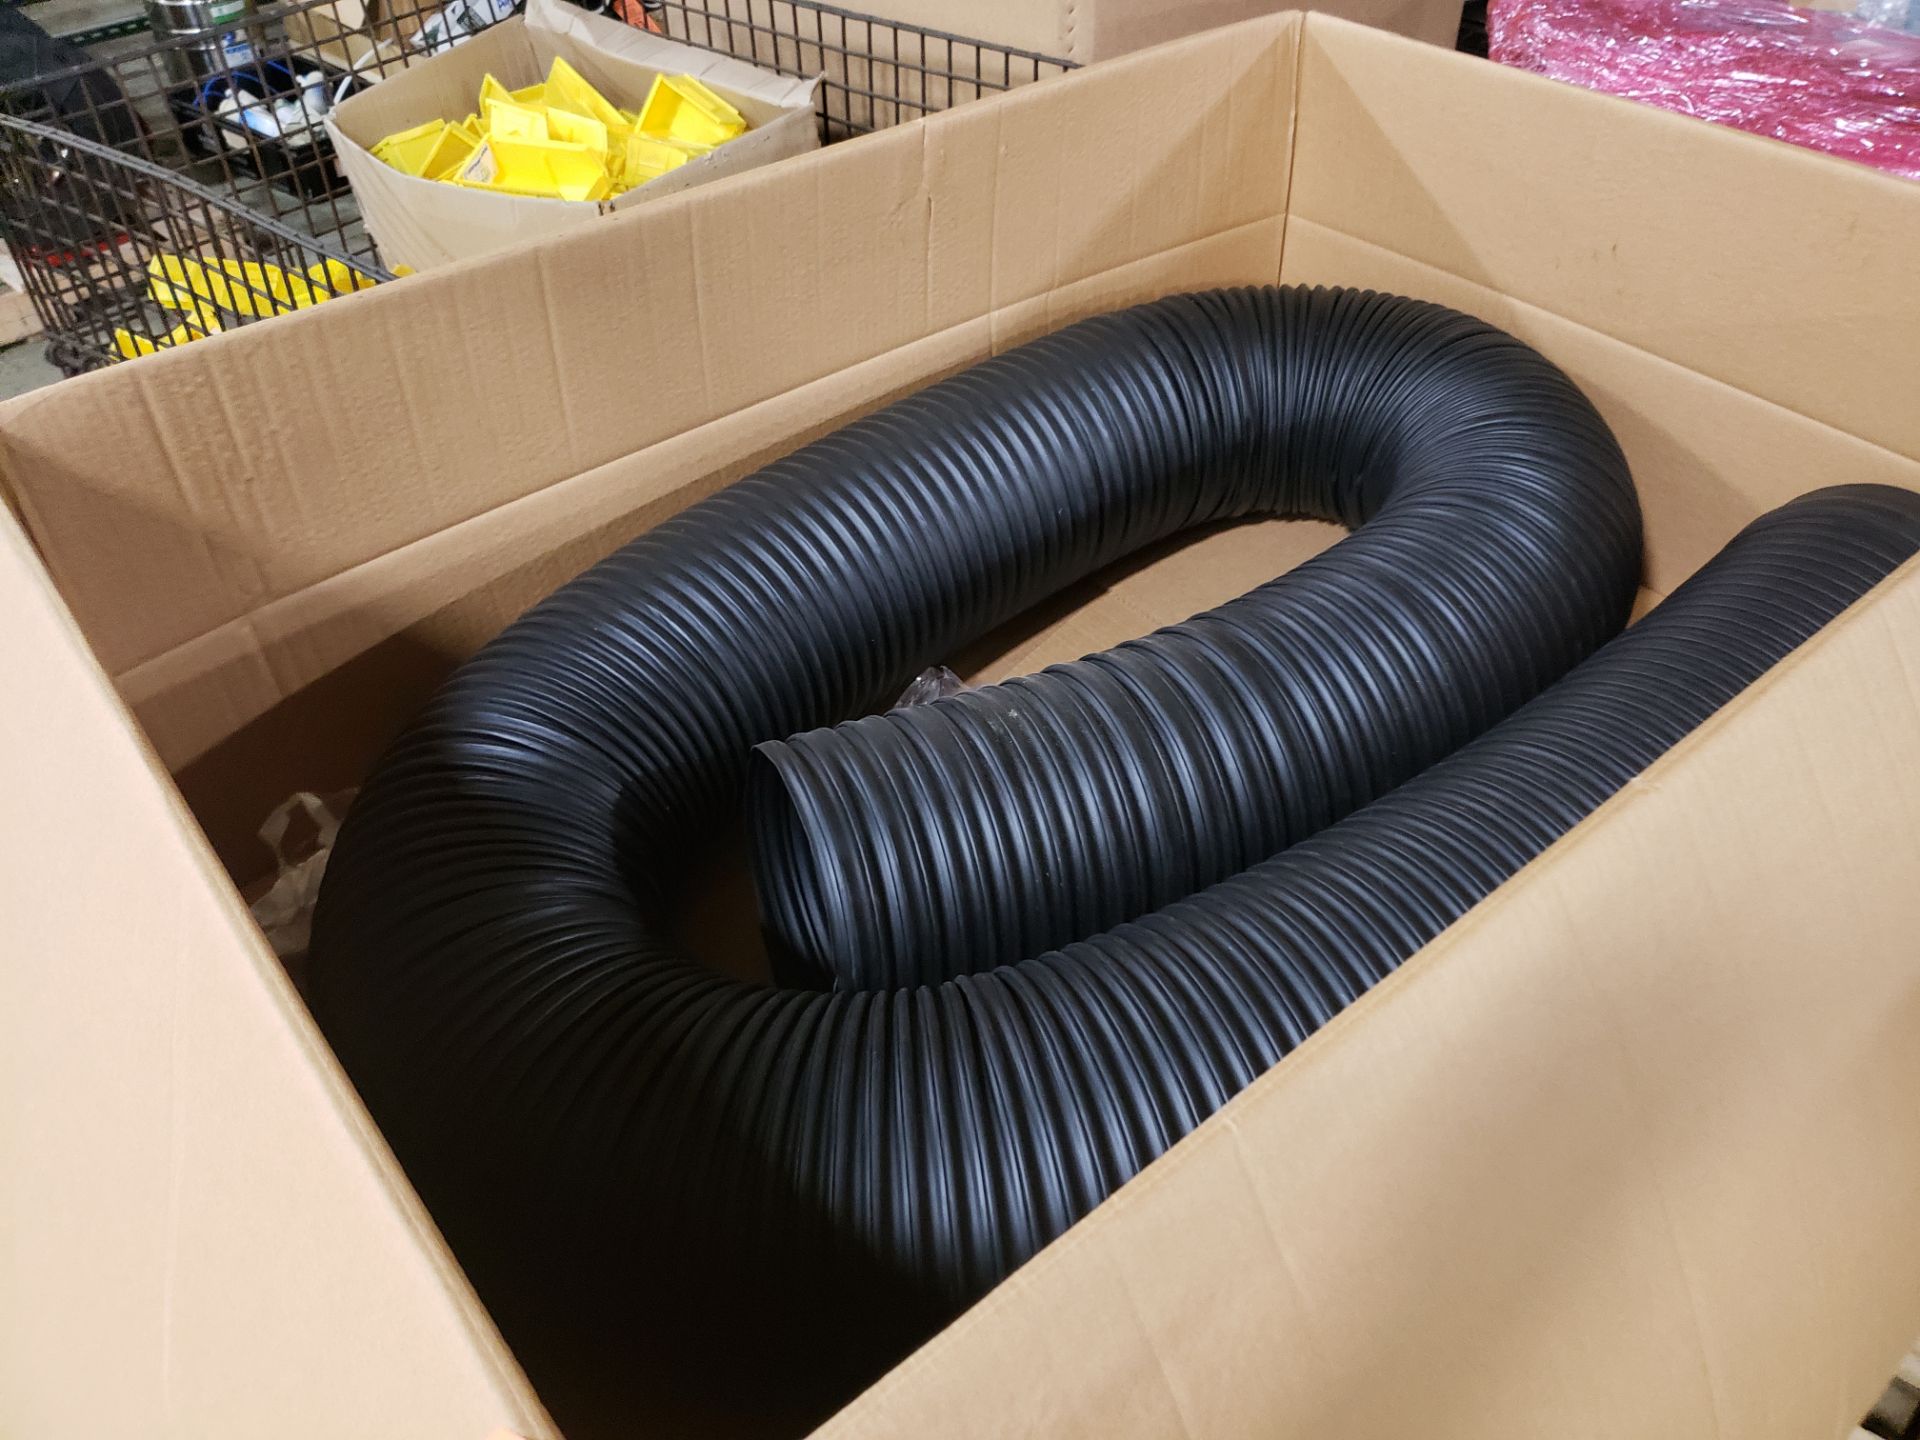 (2) BOXES OF 8 IN X 20 FT BLACK FLEXIBLE DUCT